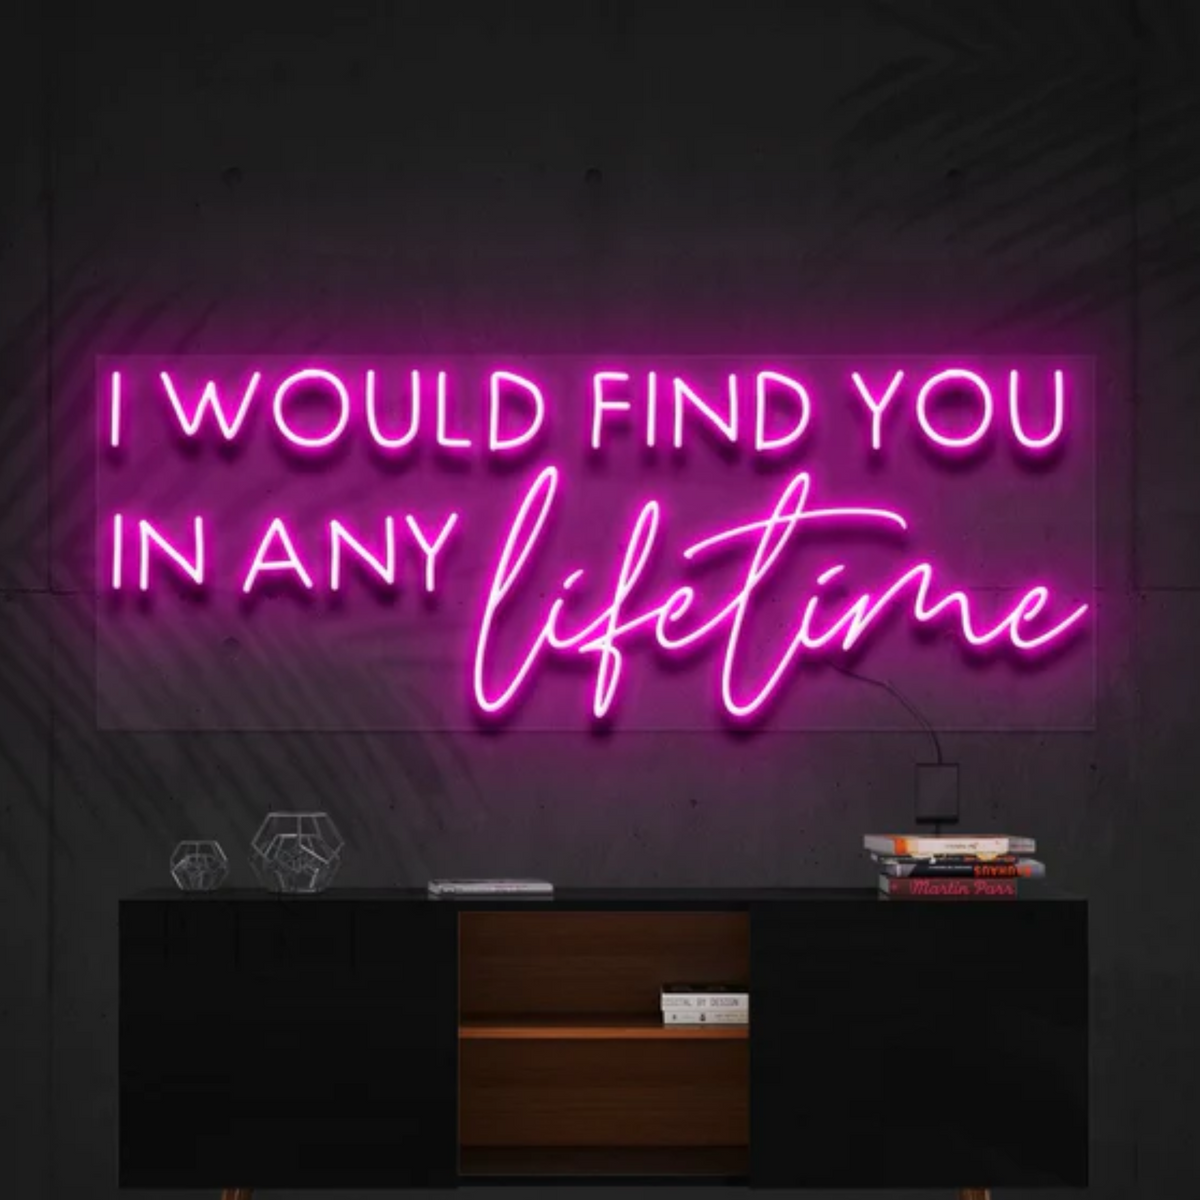 I Would Find You in Any Lifetime